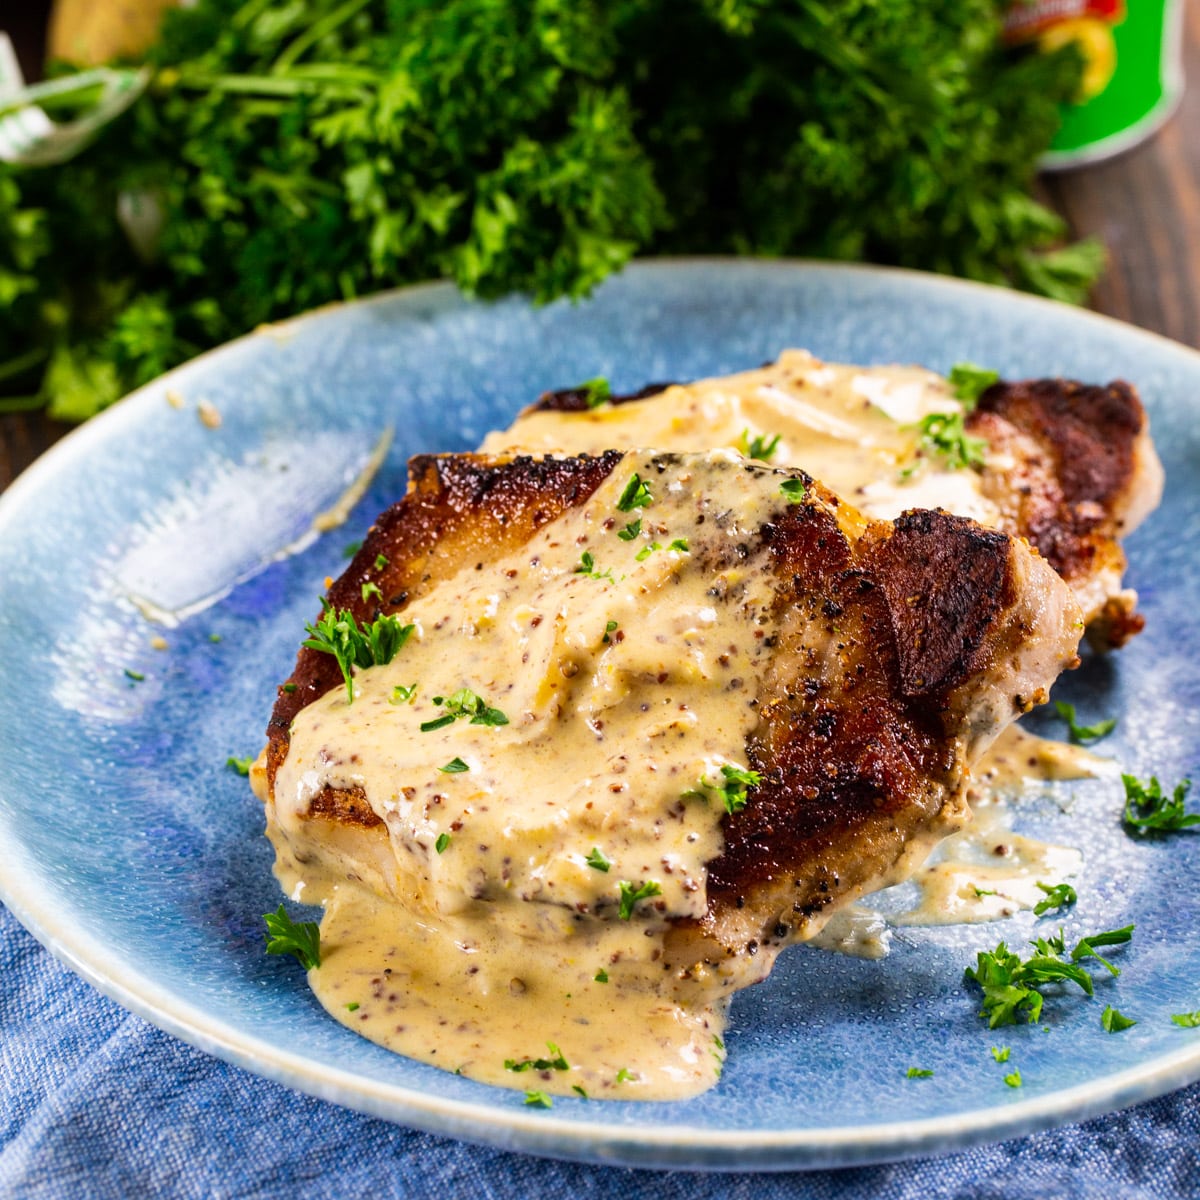 Pork Chops with Creole Mustard Sauce dished up on a plate.